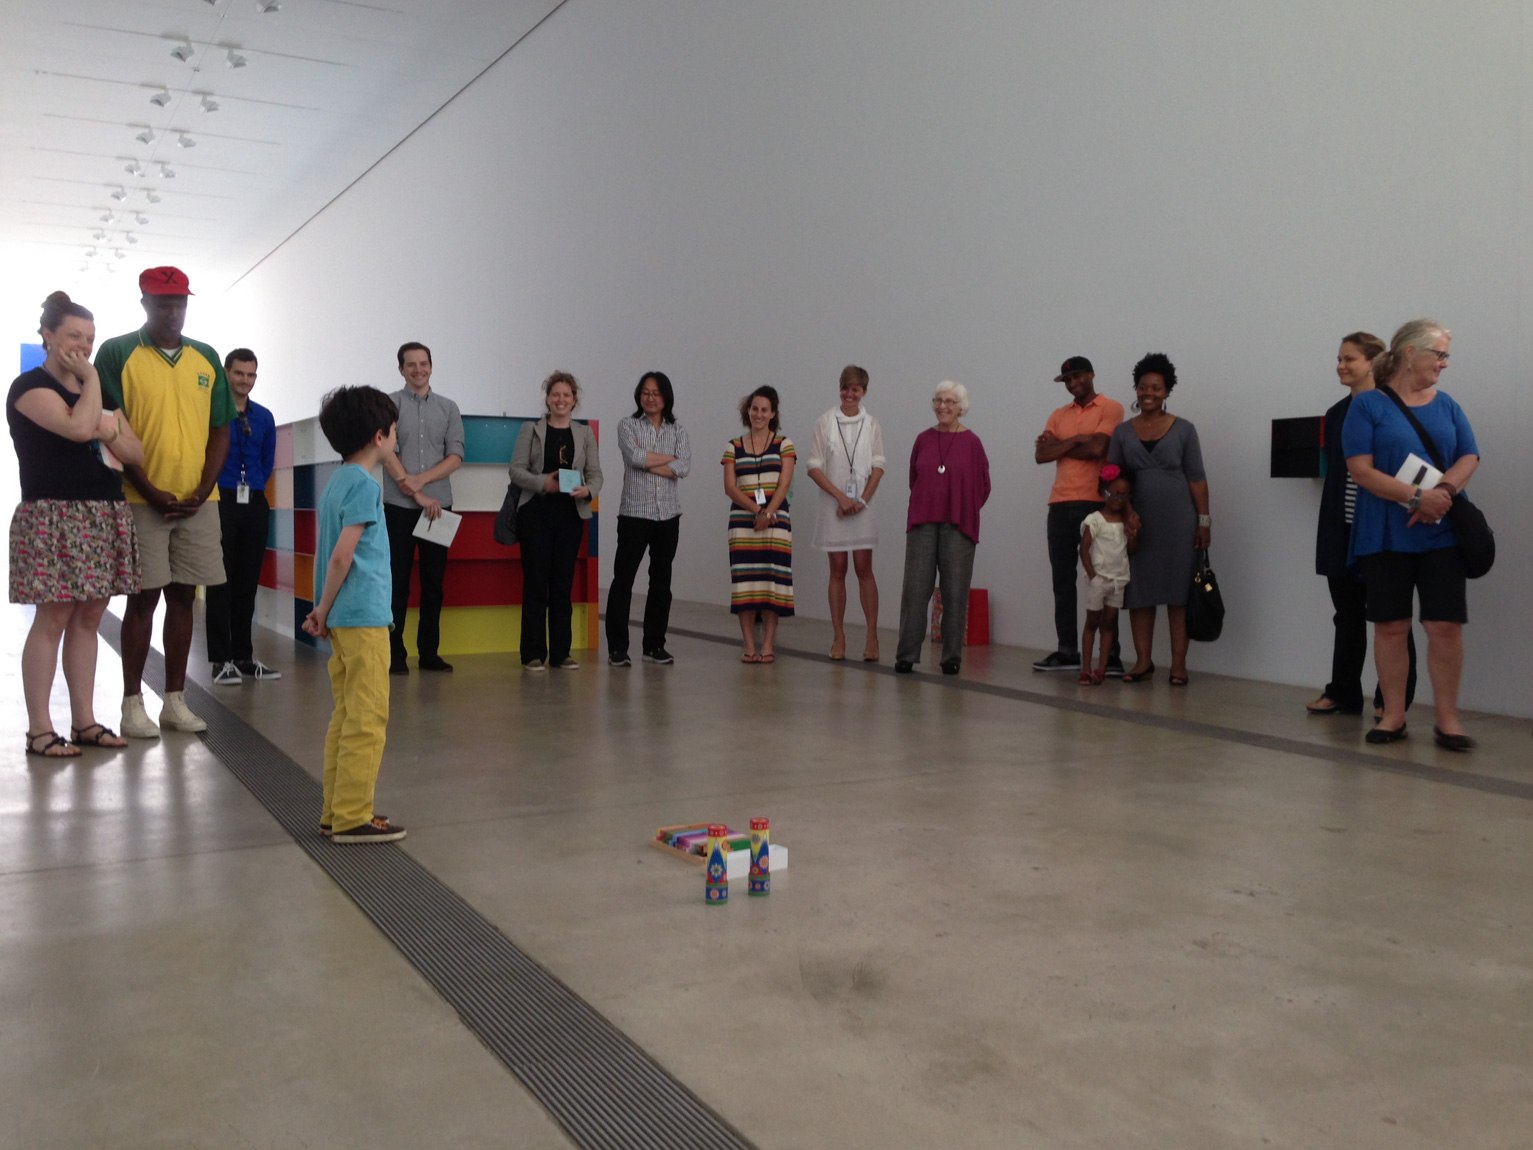 Participants gather in a large circle in the Main Gallery around a child talking to them. A colorful toy sits on the ground beside them.